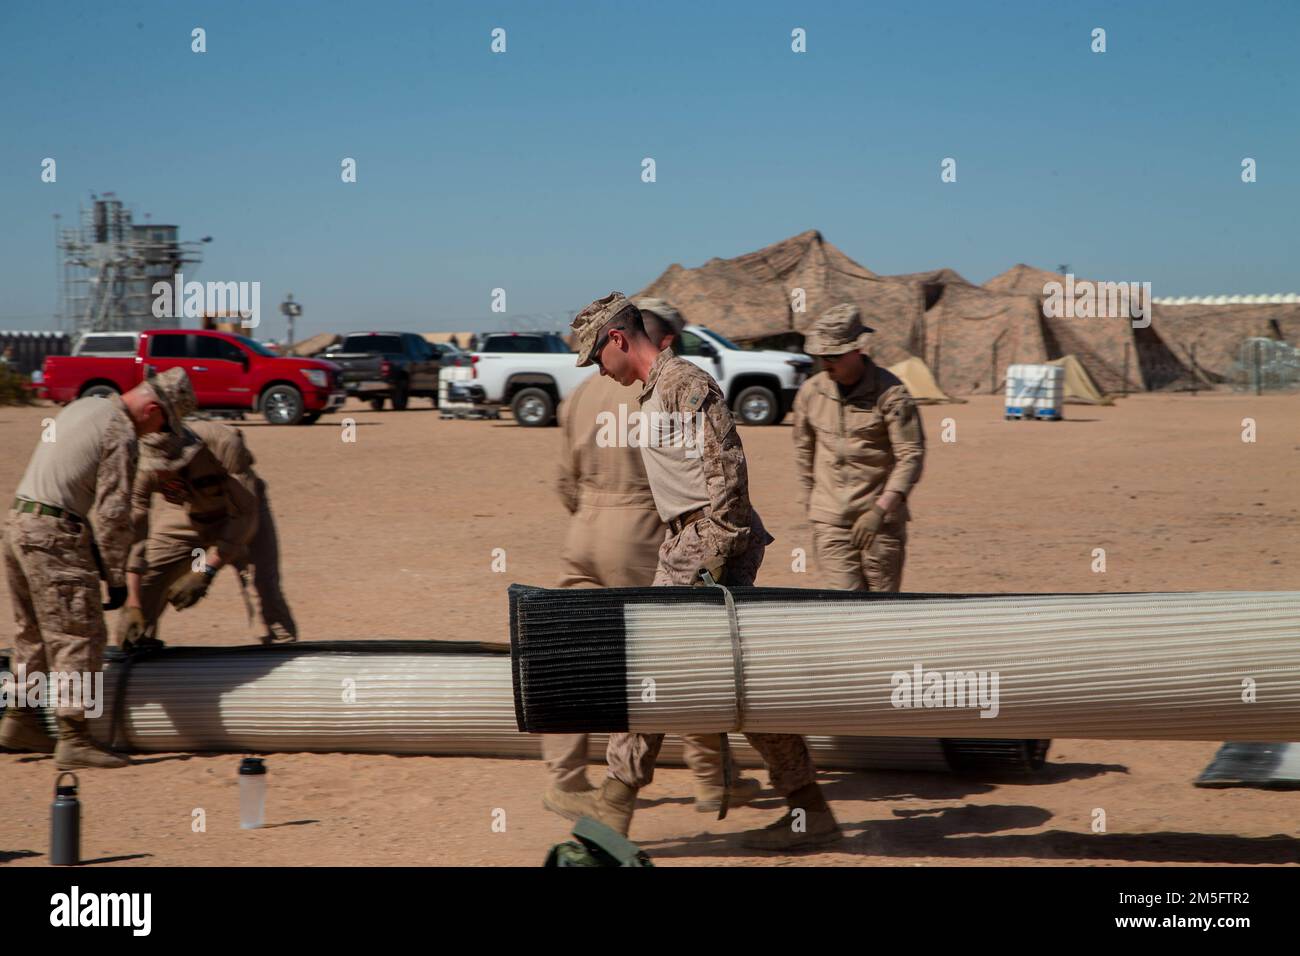 U.S. Marines attached to Marine Aviation Weapons and Tactics Squadron One (MAWTS-1), set up Mobi-Mats for an expeditionary airfield system practical application, during Weapons and Tactics Instructor (WTI) course 2-22, at Auxiliary Airfield II, in Yuma, Arizona, March 15, 2022. WTI is a seven-week training event hosted by MAWTS-1, providing standardized advanced tactical training and certification of unit instructor qualifications to support Marine aviation training and readiness, and assist in developing and employing aviation weapons and tactics. Stock Photo